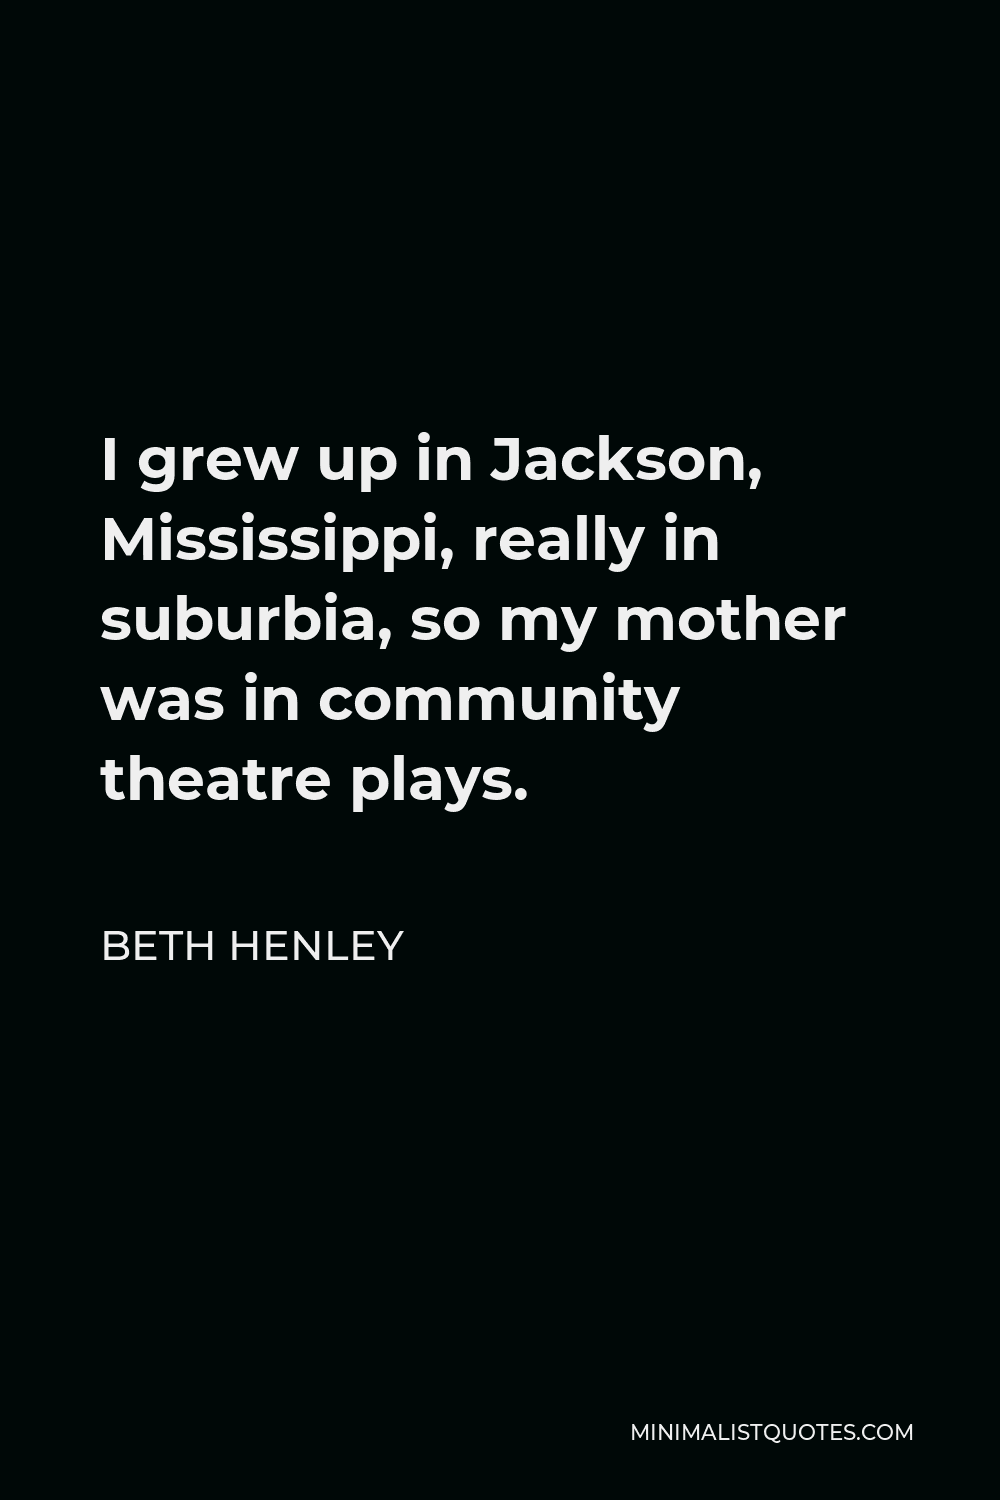 Beth Henley Quote - I grew up in Jackson, Mississippi, really in suburbia, so my mother was in community theatre plays.